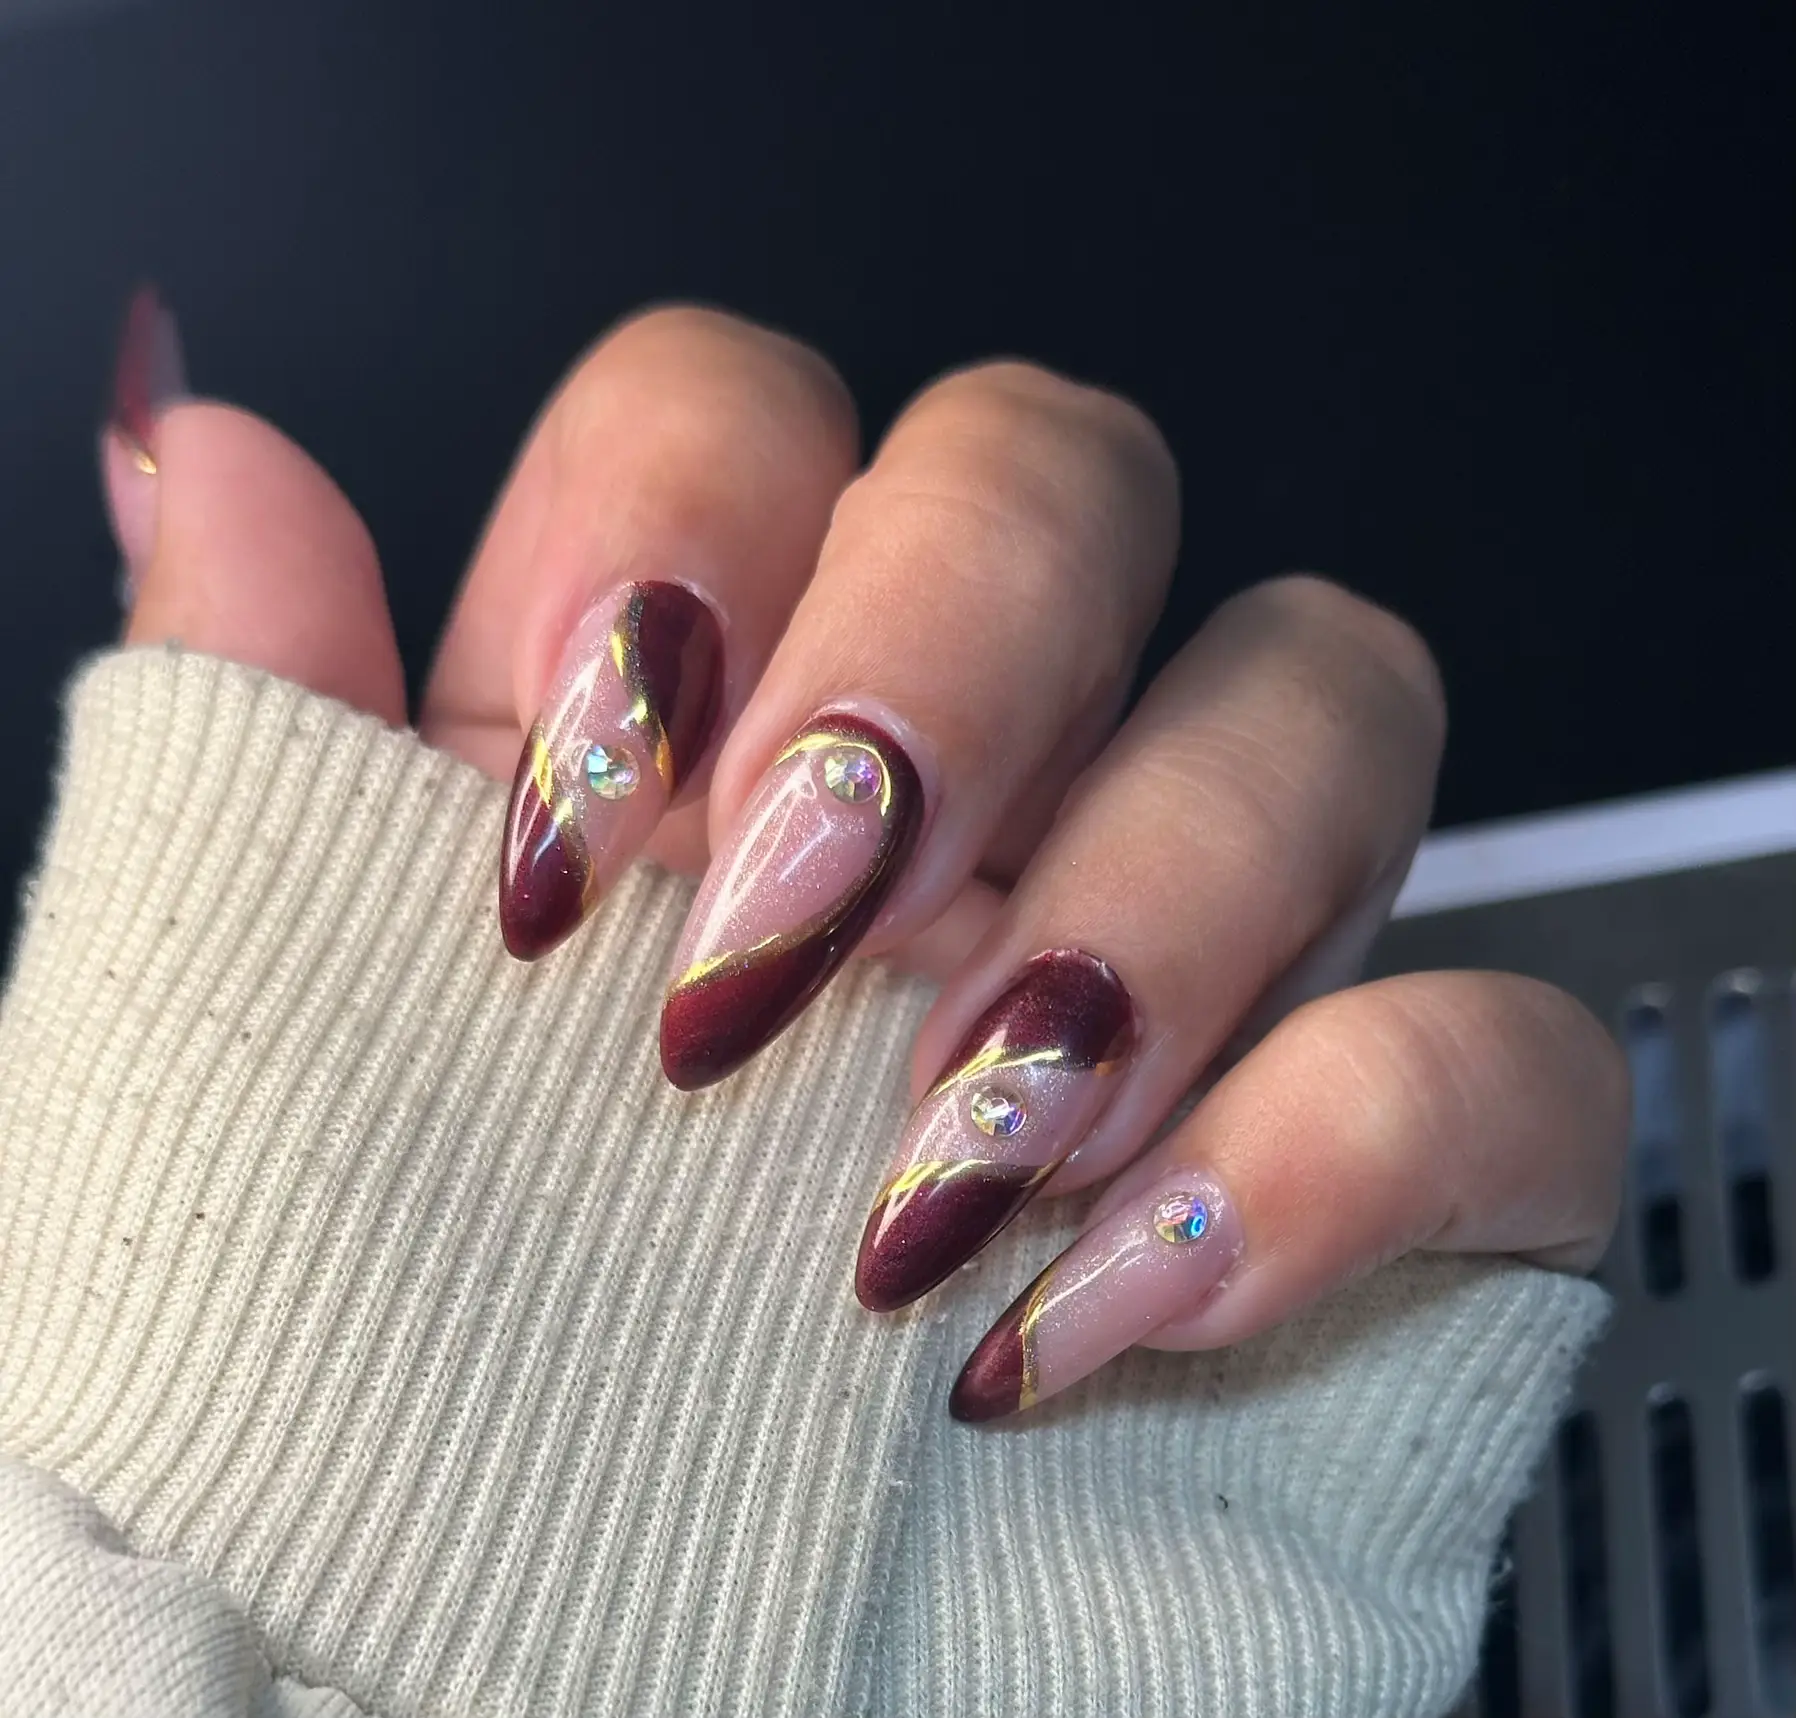 NAIL INSPO AND TIPS, Gallery posted by kayladhollis